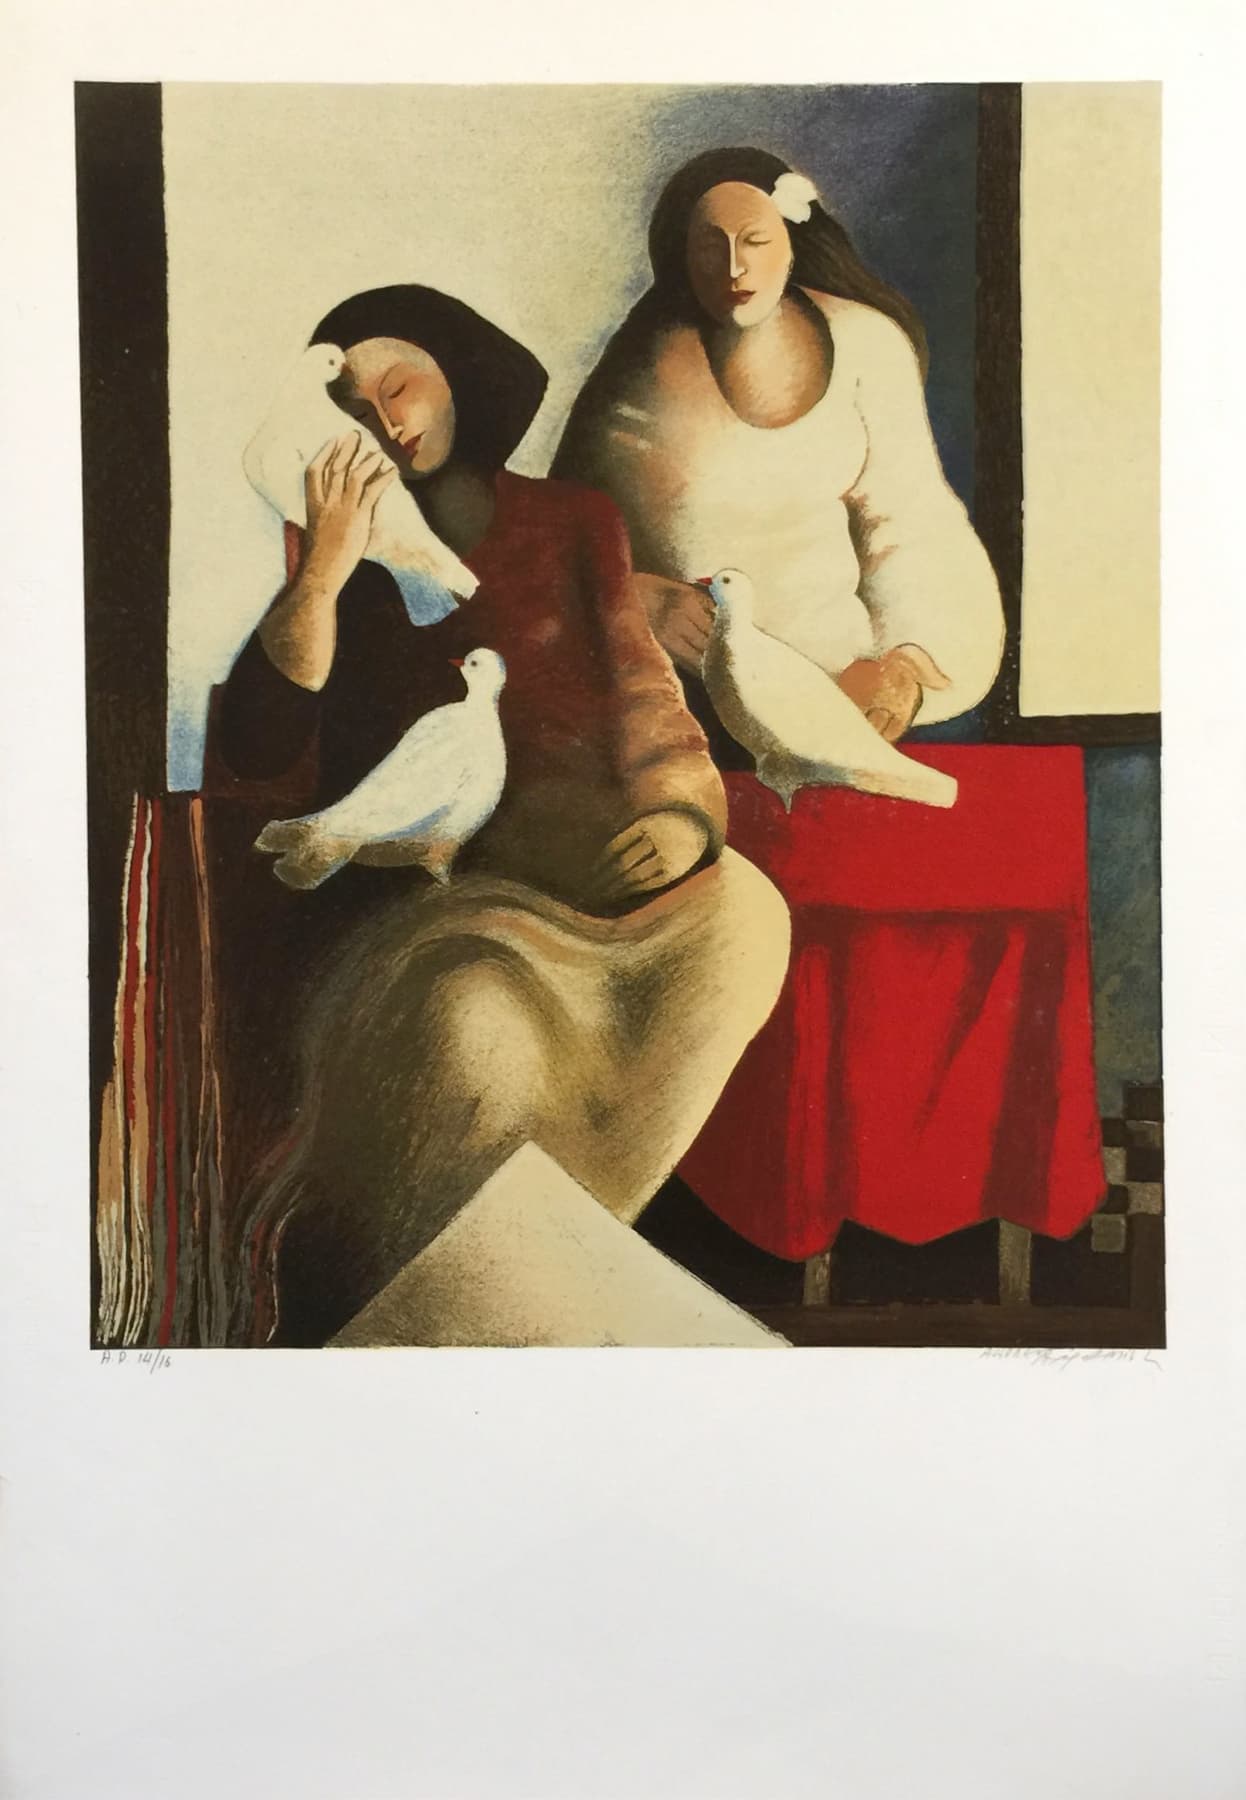 Charalambidis Andreas, Two figures with doves, Silkscreen, 100 x 70 cm